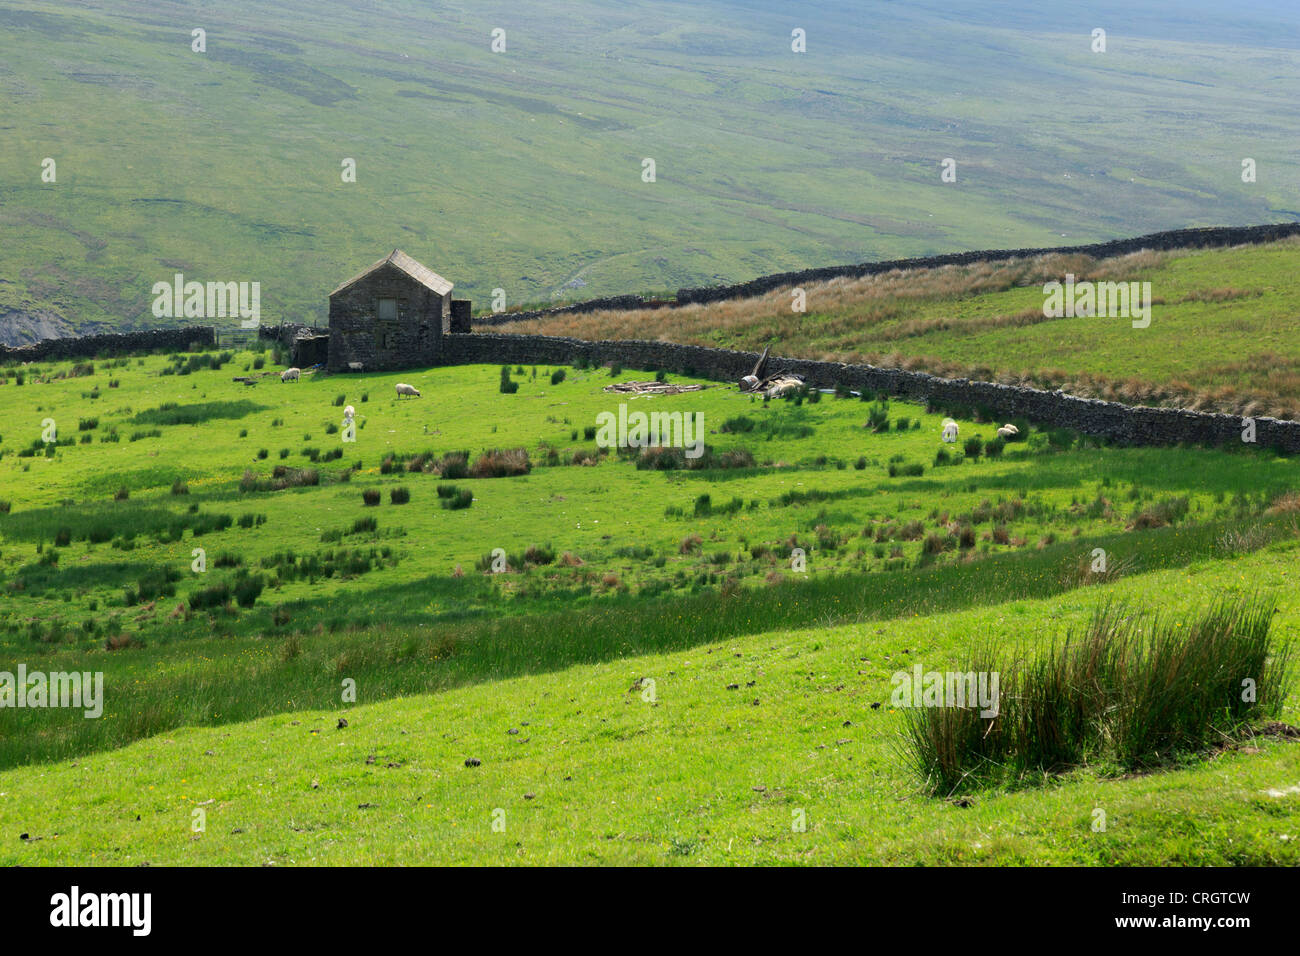 Sheep graze in a pasture in Swaledale, North Yorkshire Stock Photo